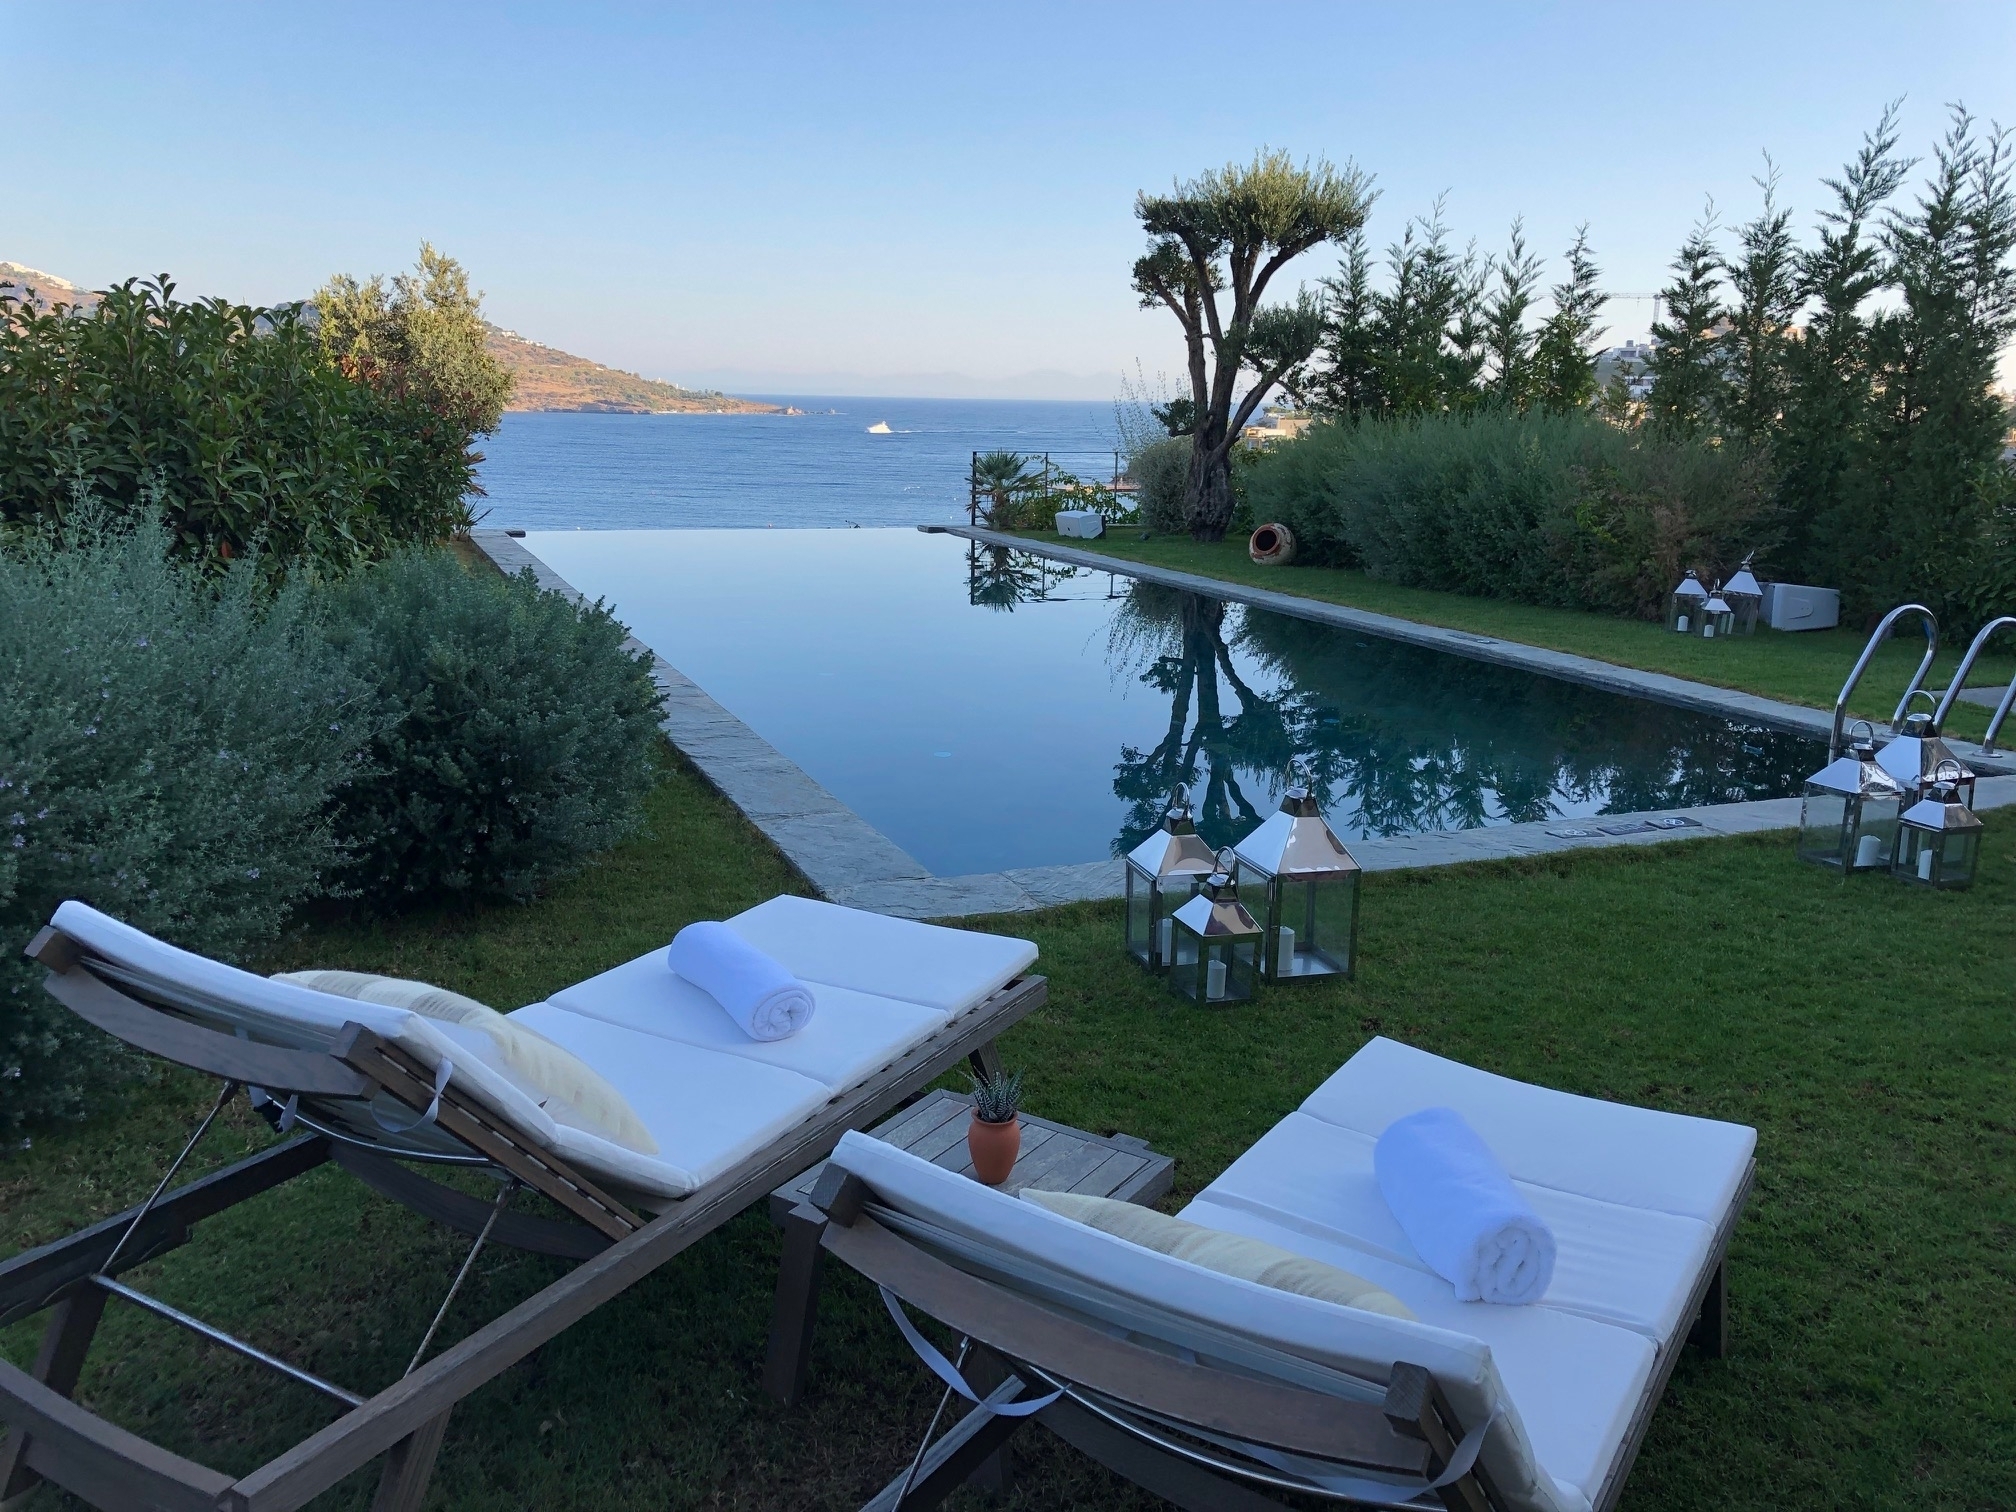 This one’s near the remote Turkish city of Bodrum, overlooking the Aegean Sea. Clear and green-tinted at ocean’s edge, the water turns bright sapphire further out.